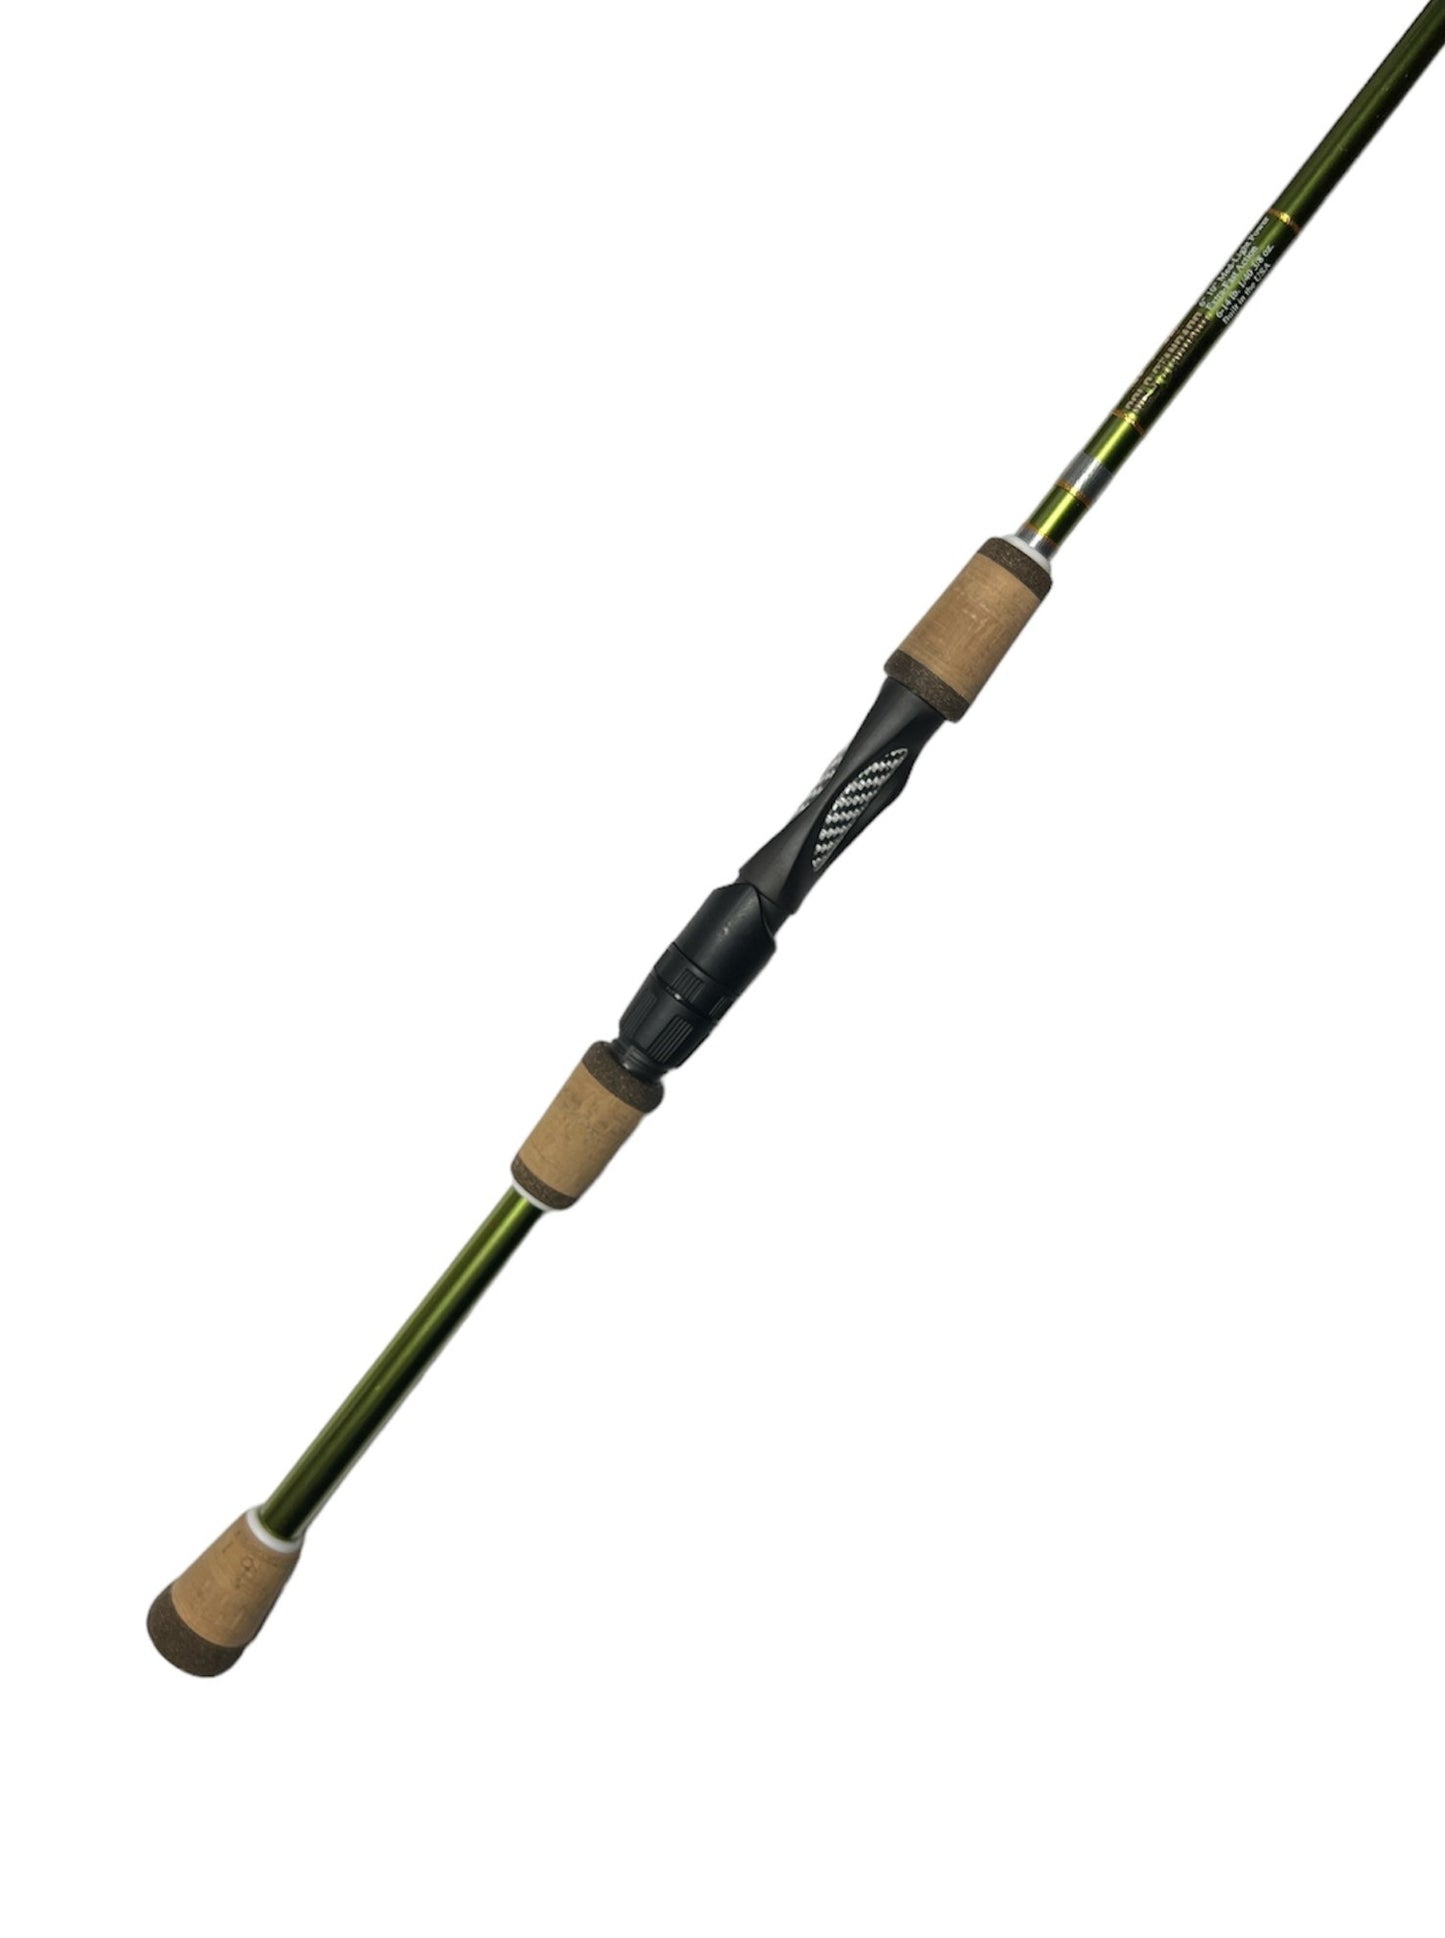 6'10 Med-Light Power Extra Fast Action Precision Strike Series Pre-Built  Spinning Rod - Green & Silver